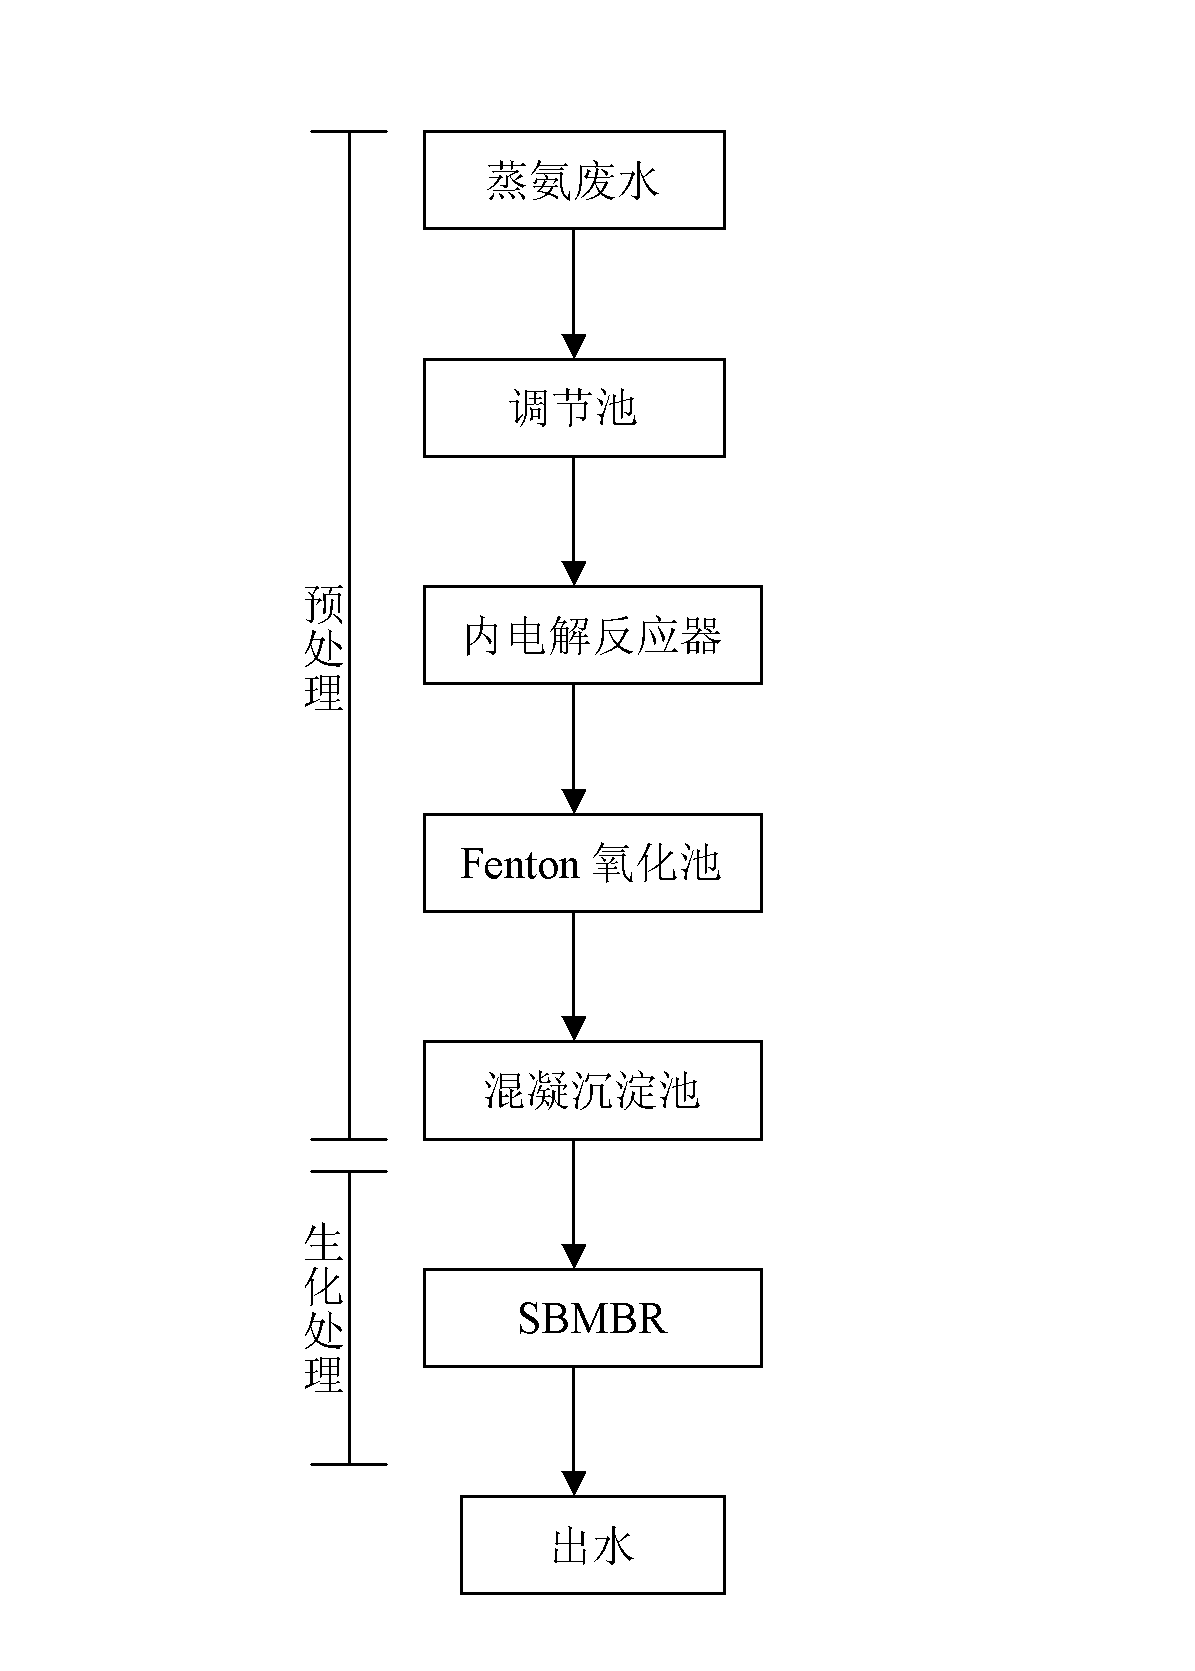 Processing method of coking steaming ammonia wastewater